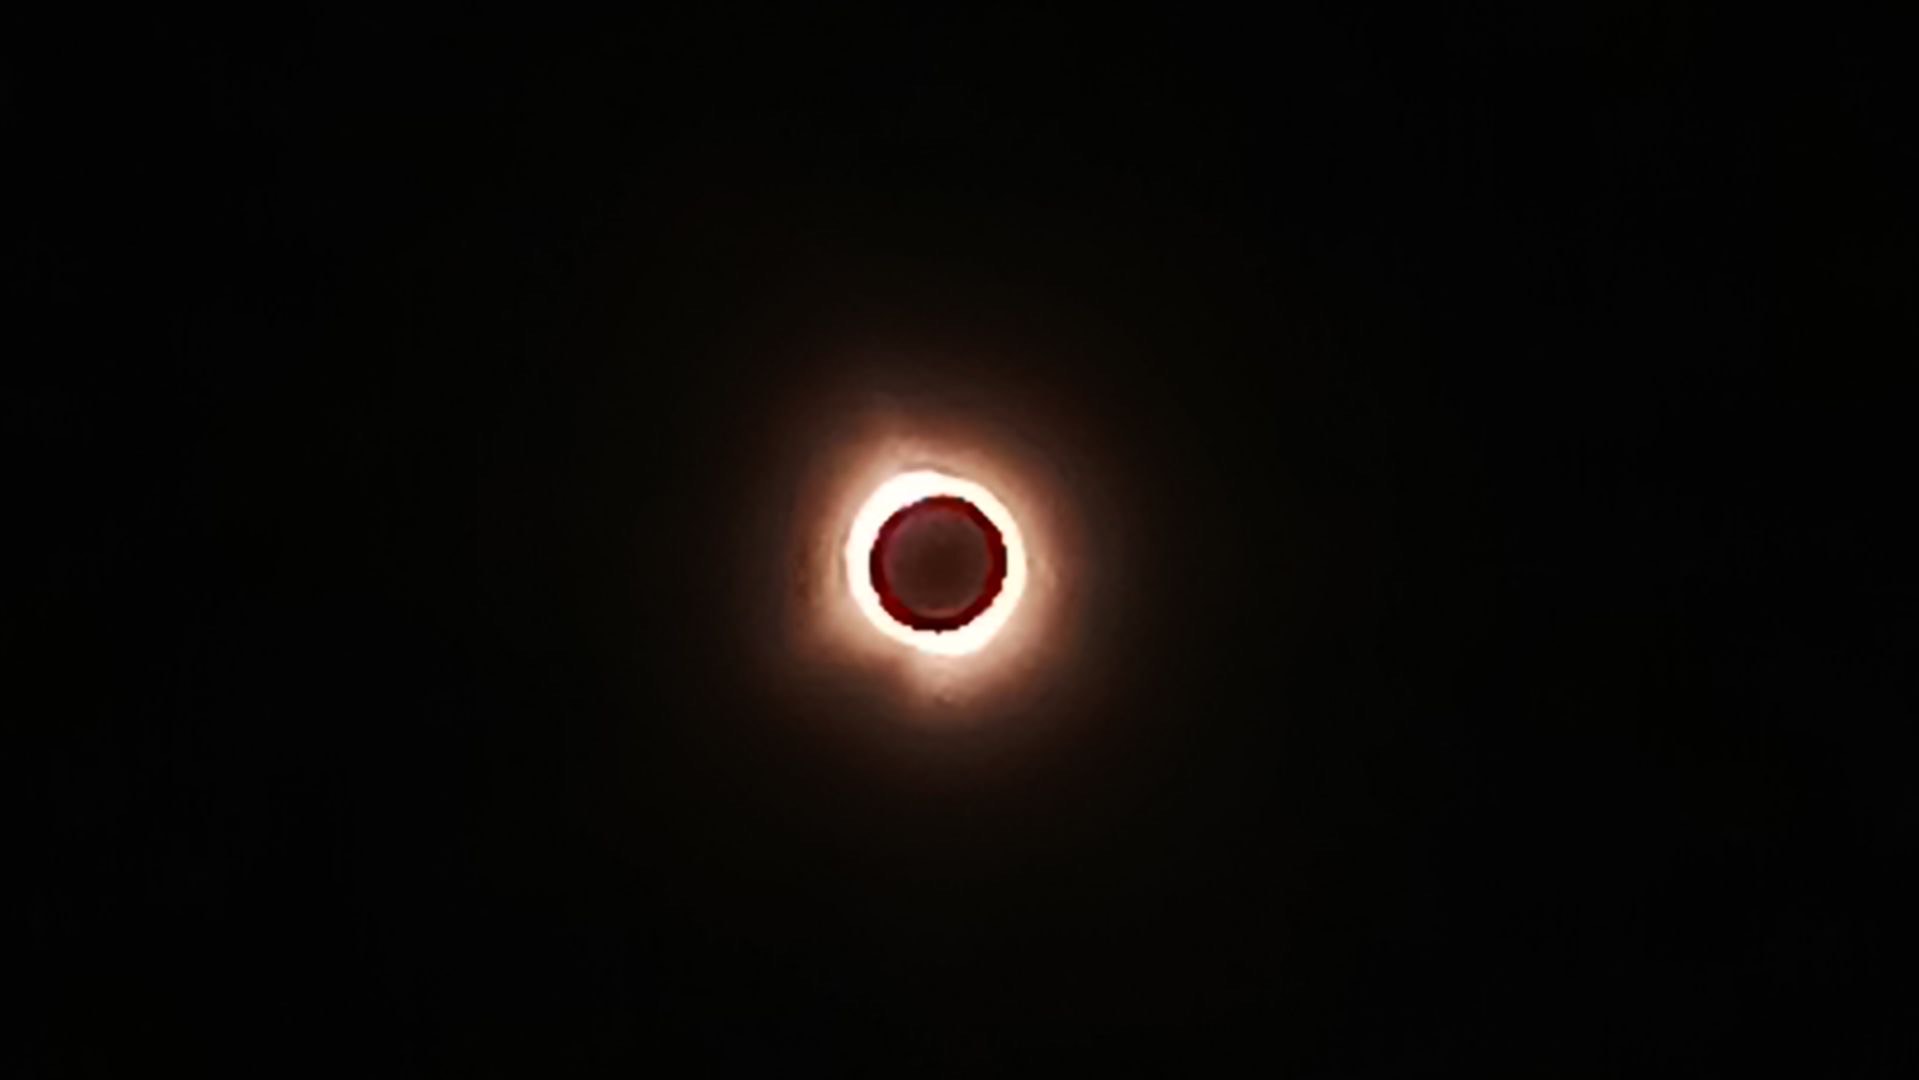 Solar eclipse in totality